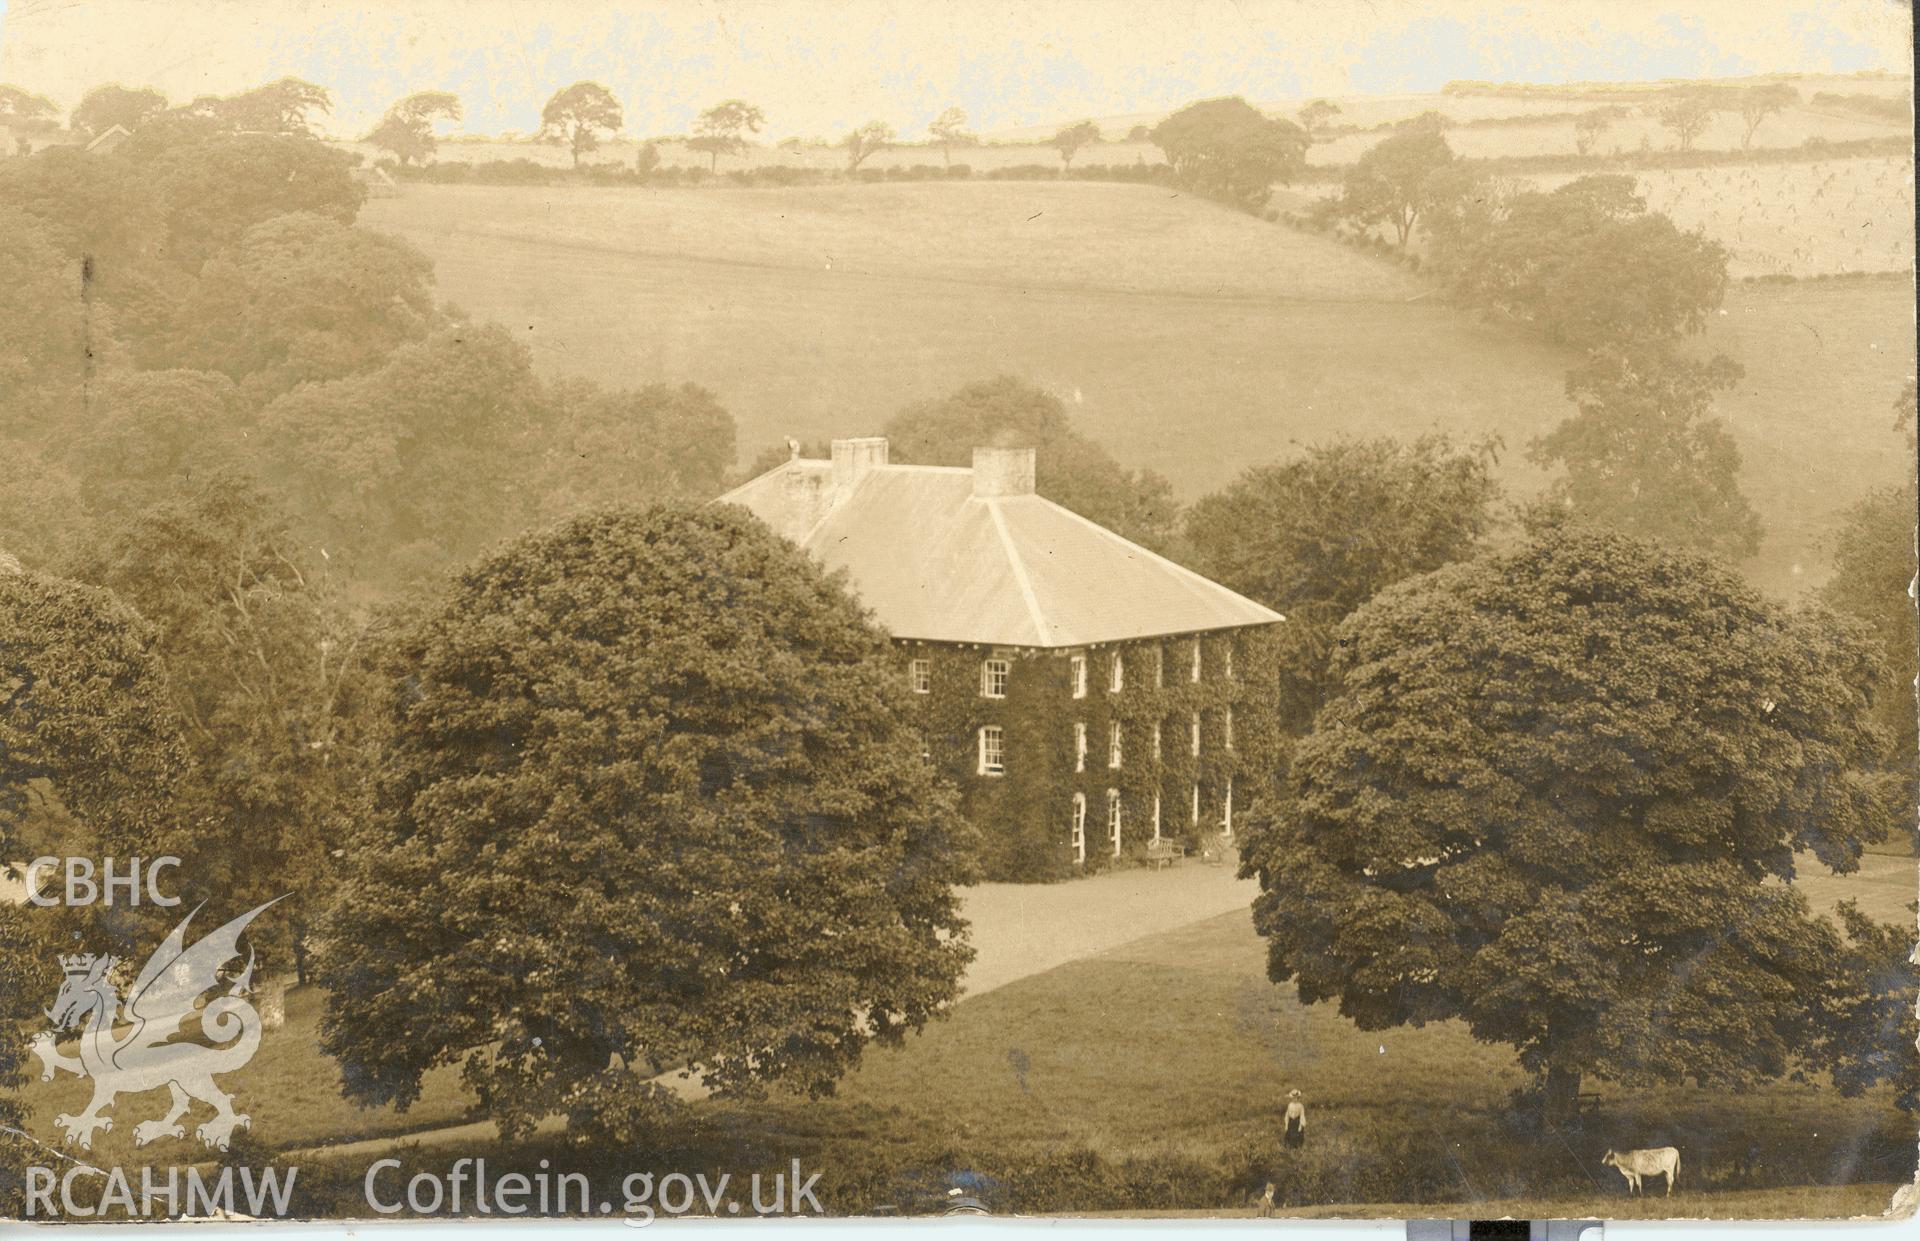 Digitised postcard image of Mabws Hall, Llanrhystyd. Produced by Parks and Gardens Data Services, from an original item in the Peter Davis Collection at Parks and Gardens UK. We hold only web-resolution images of this collection, suitable for viewing on screen and for research purposes only. We do not hold the original images, or publication quality scans.